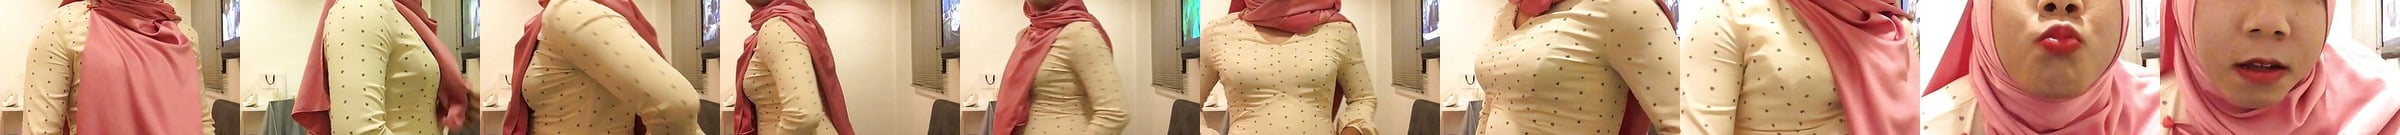 Malaysian Shemale Porn Videos Sexy Malay Trannies Xhamster